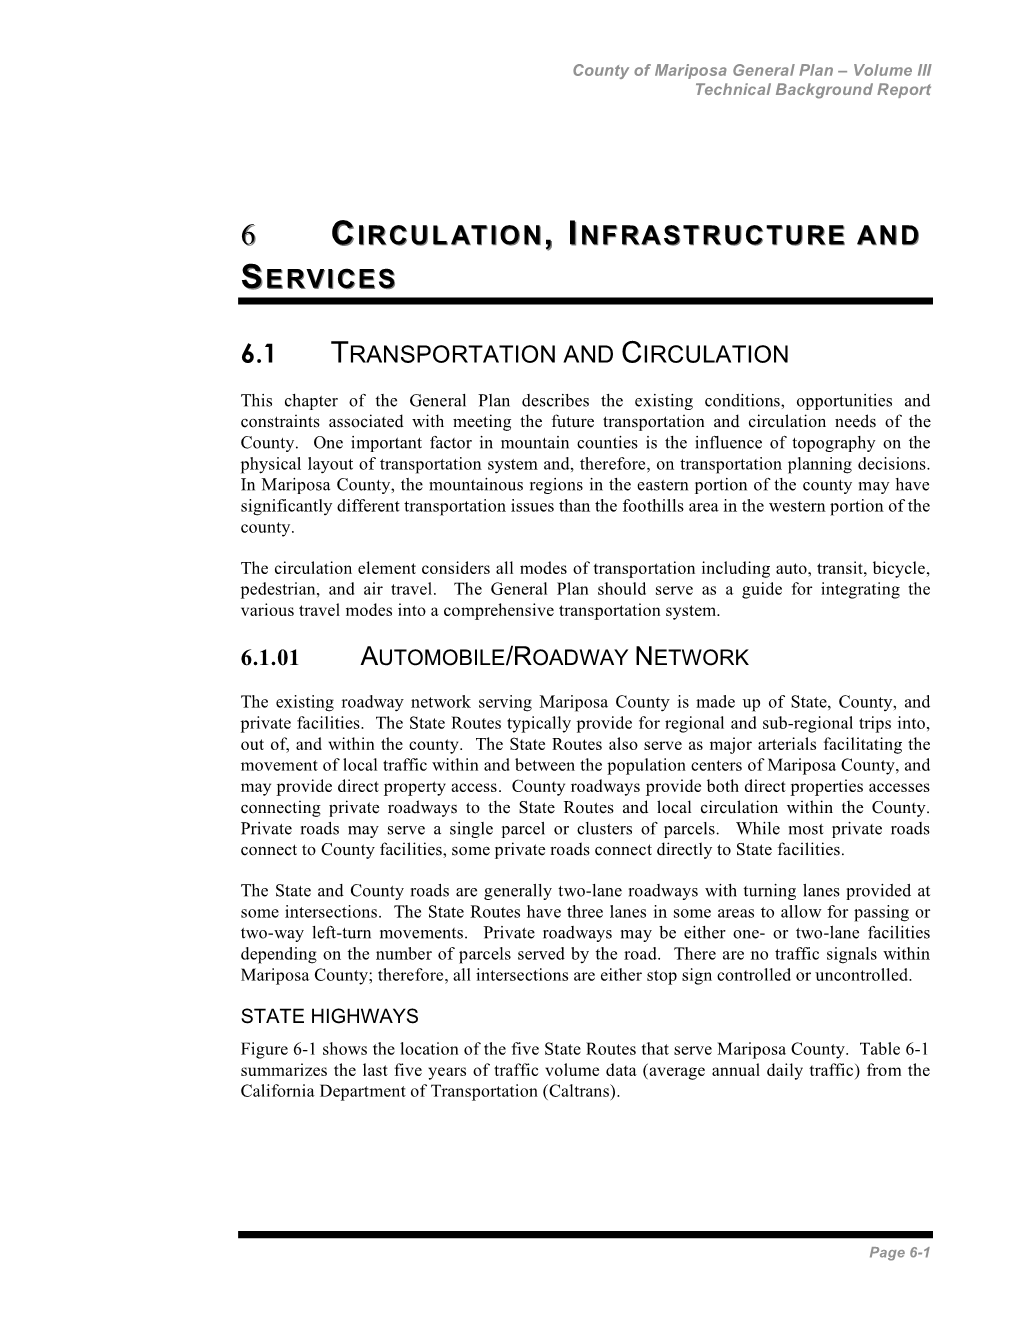 Circulation , Infrastructure and Nfrastructure and Services